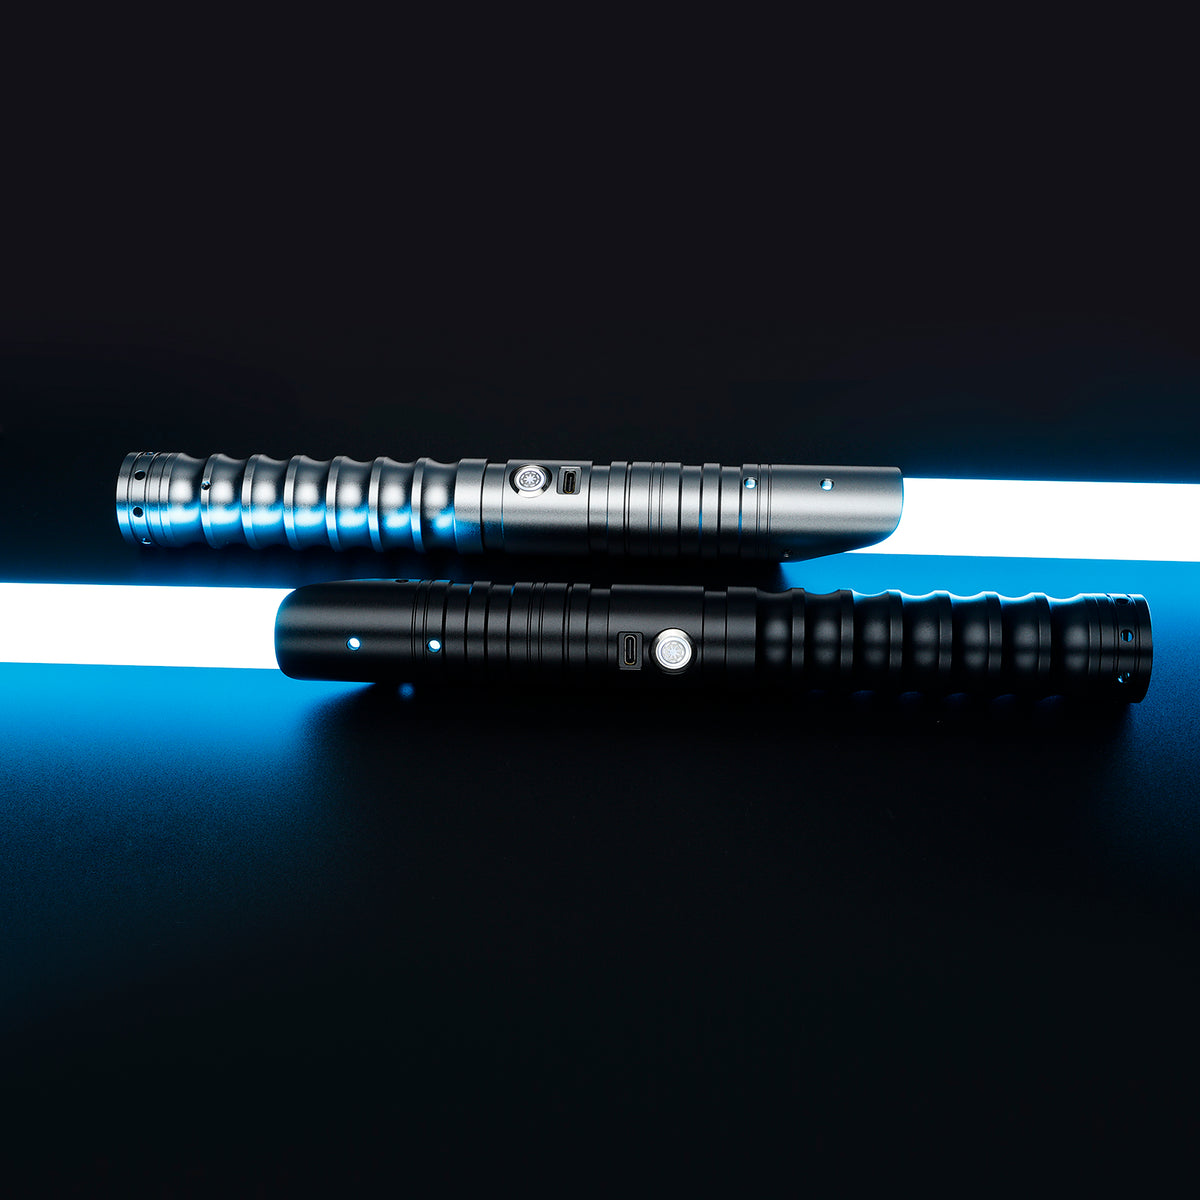 2 x SaberCustom heavy dueling lightsaber fx smooth swing 16 sound fonts infinite color changing 72CM blade NO038 1 x Grey,1 x Black